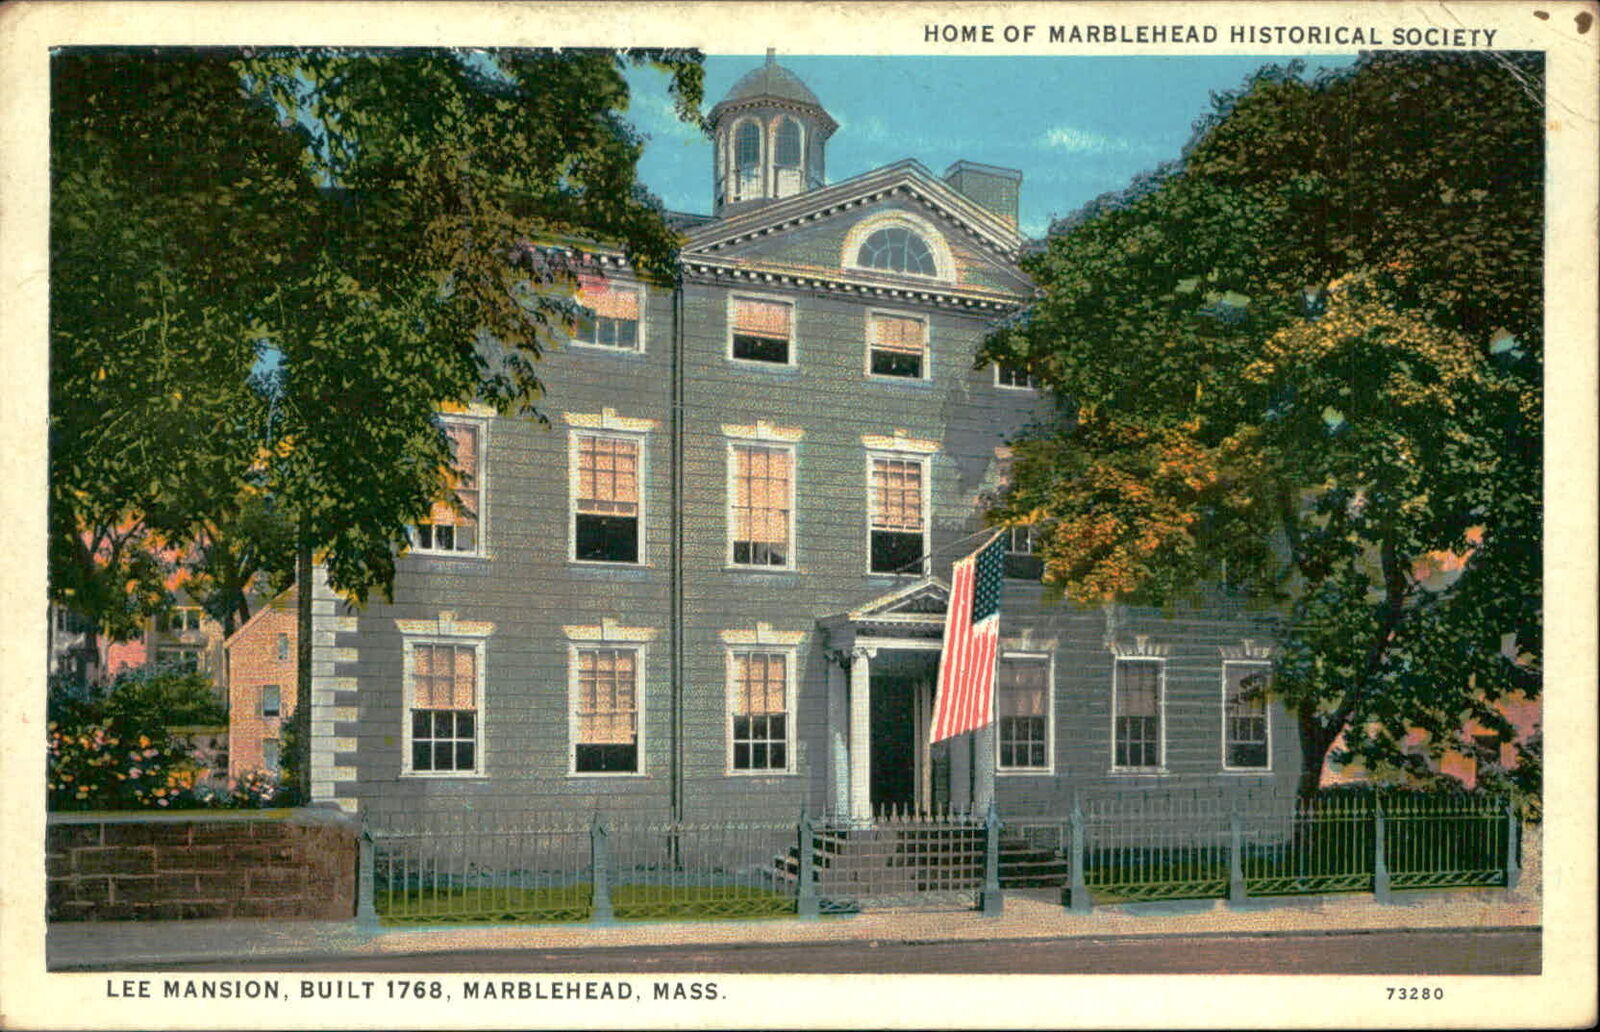 Postcard: LEE MANSION, BUILT 1768, MARBLEHEAD, MASS. HOME OF MARBLEHEA